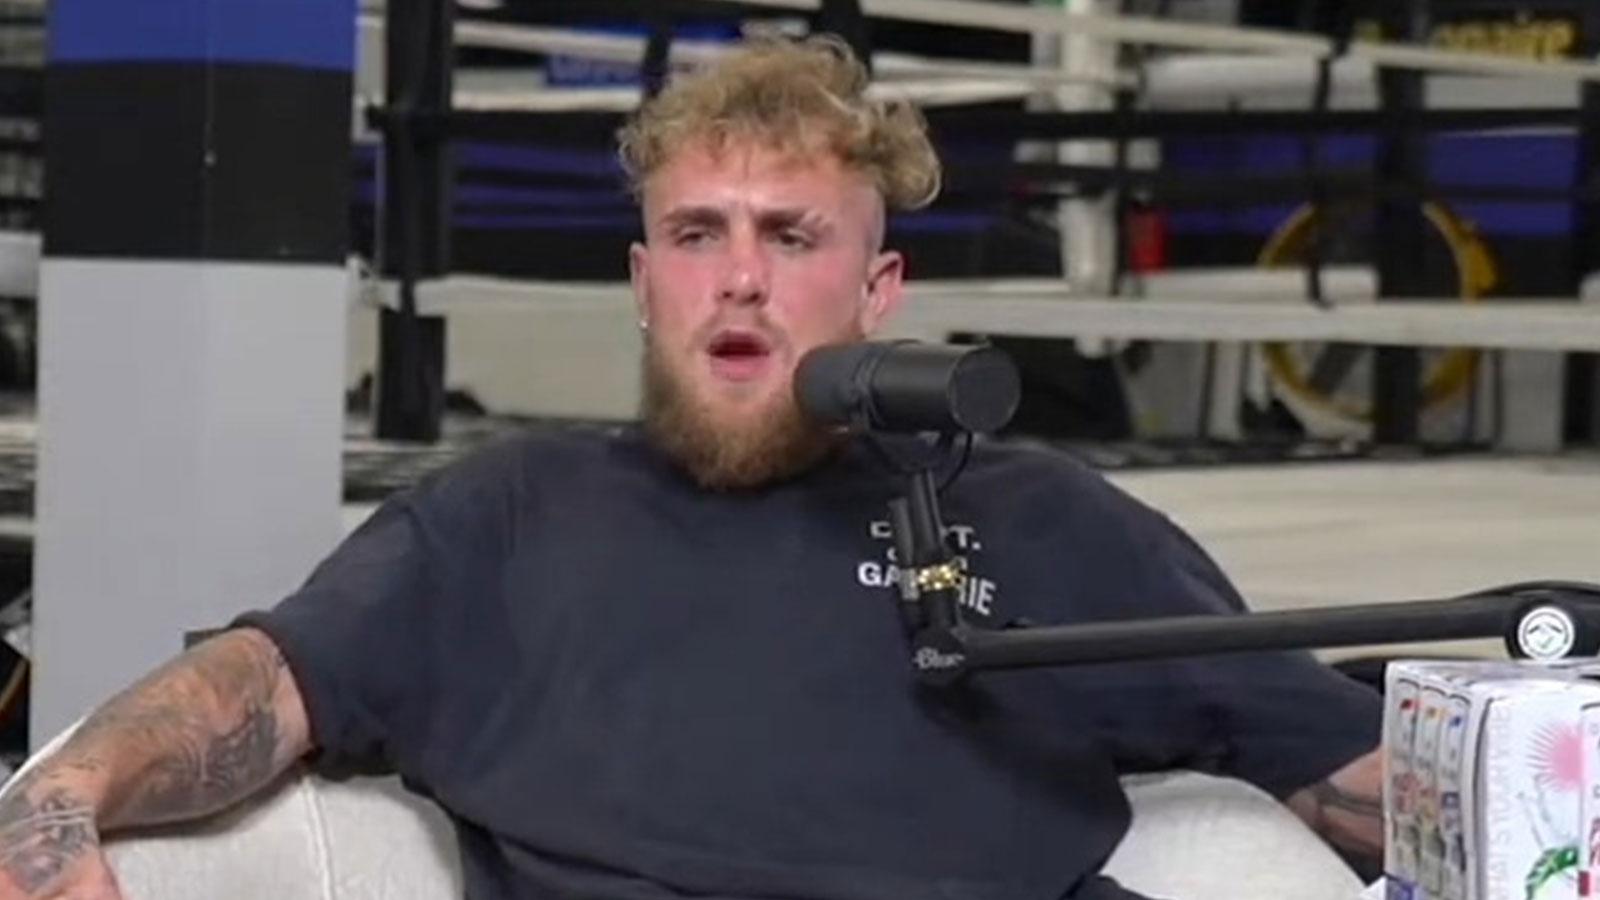 Jake Paul sat on chair wearing black t-shirt with microphone in front of face